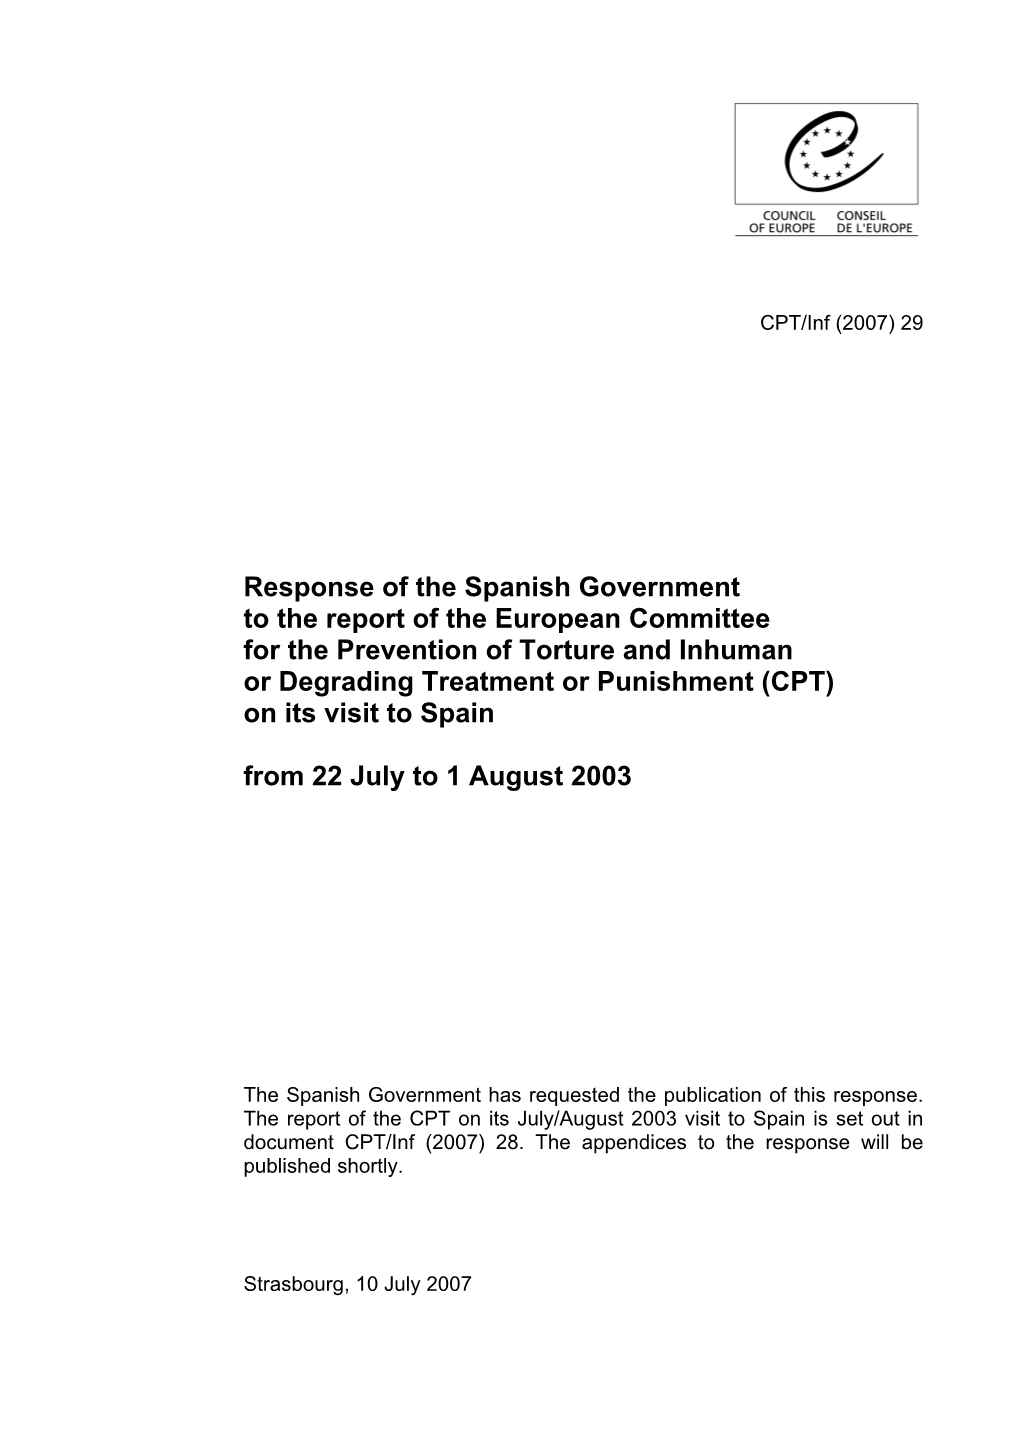 Response of the Spanish Government to the Report of the European Committee for the Prevention of Torture and Inhuman Or Degradin